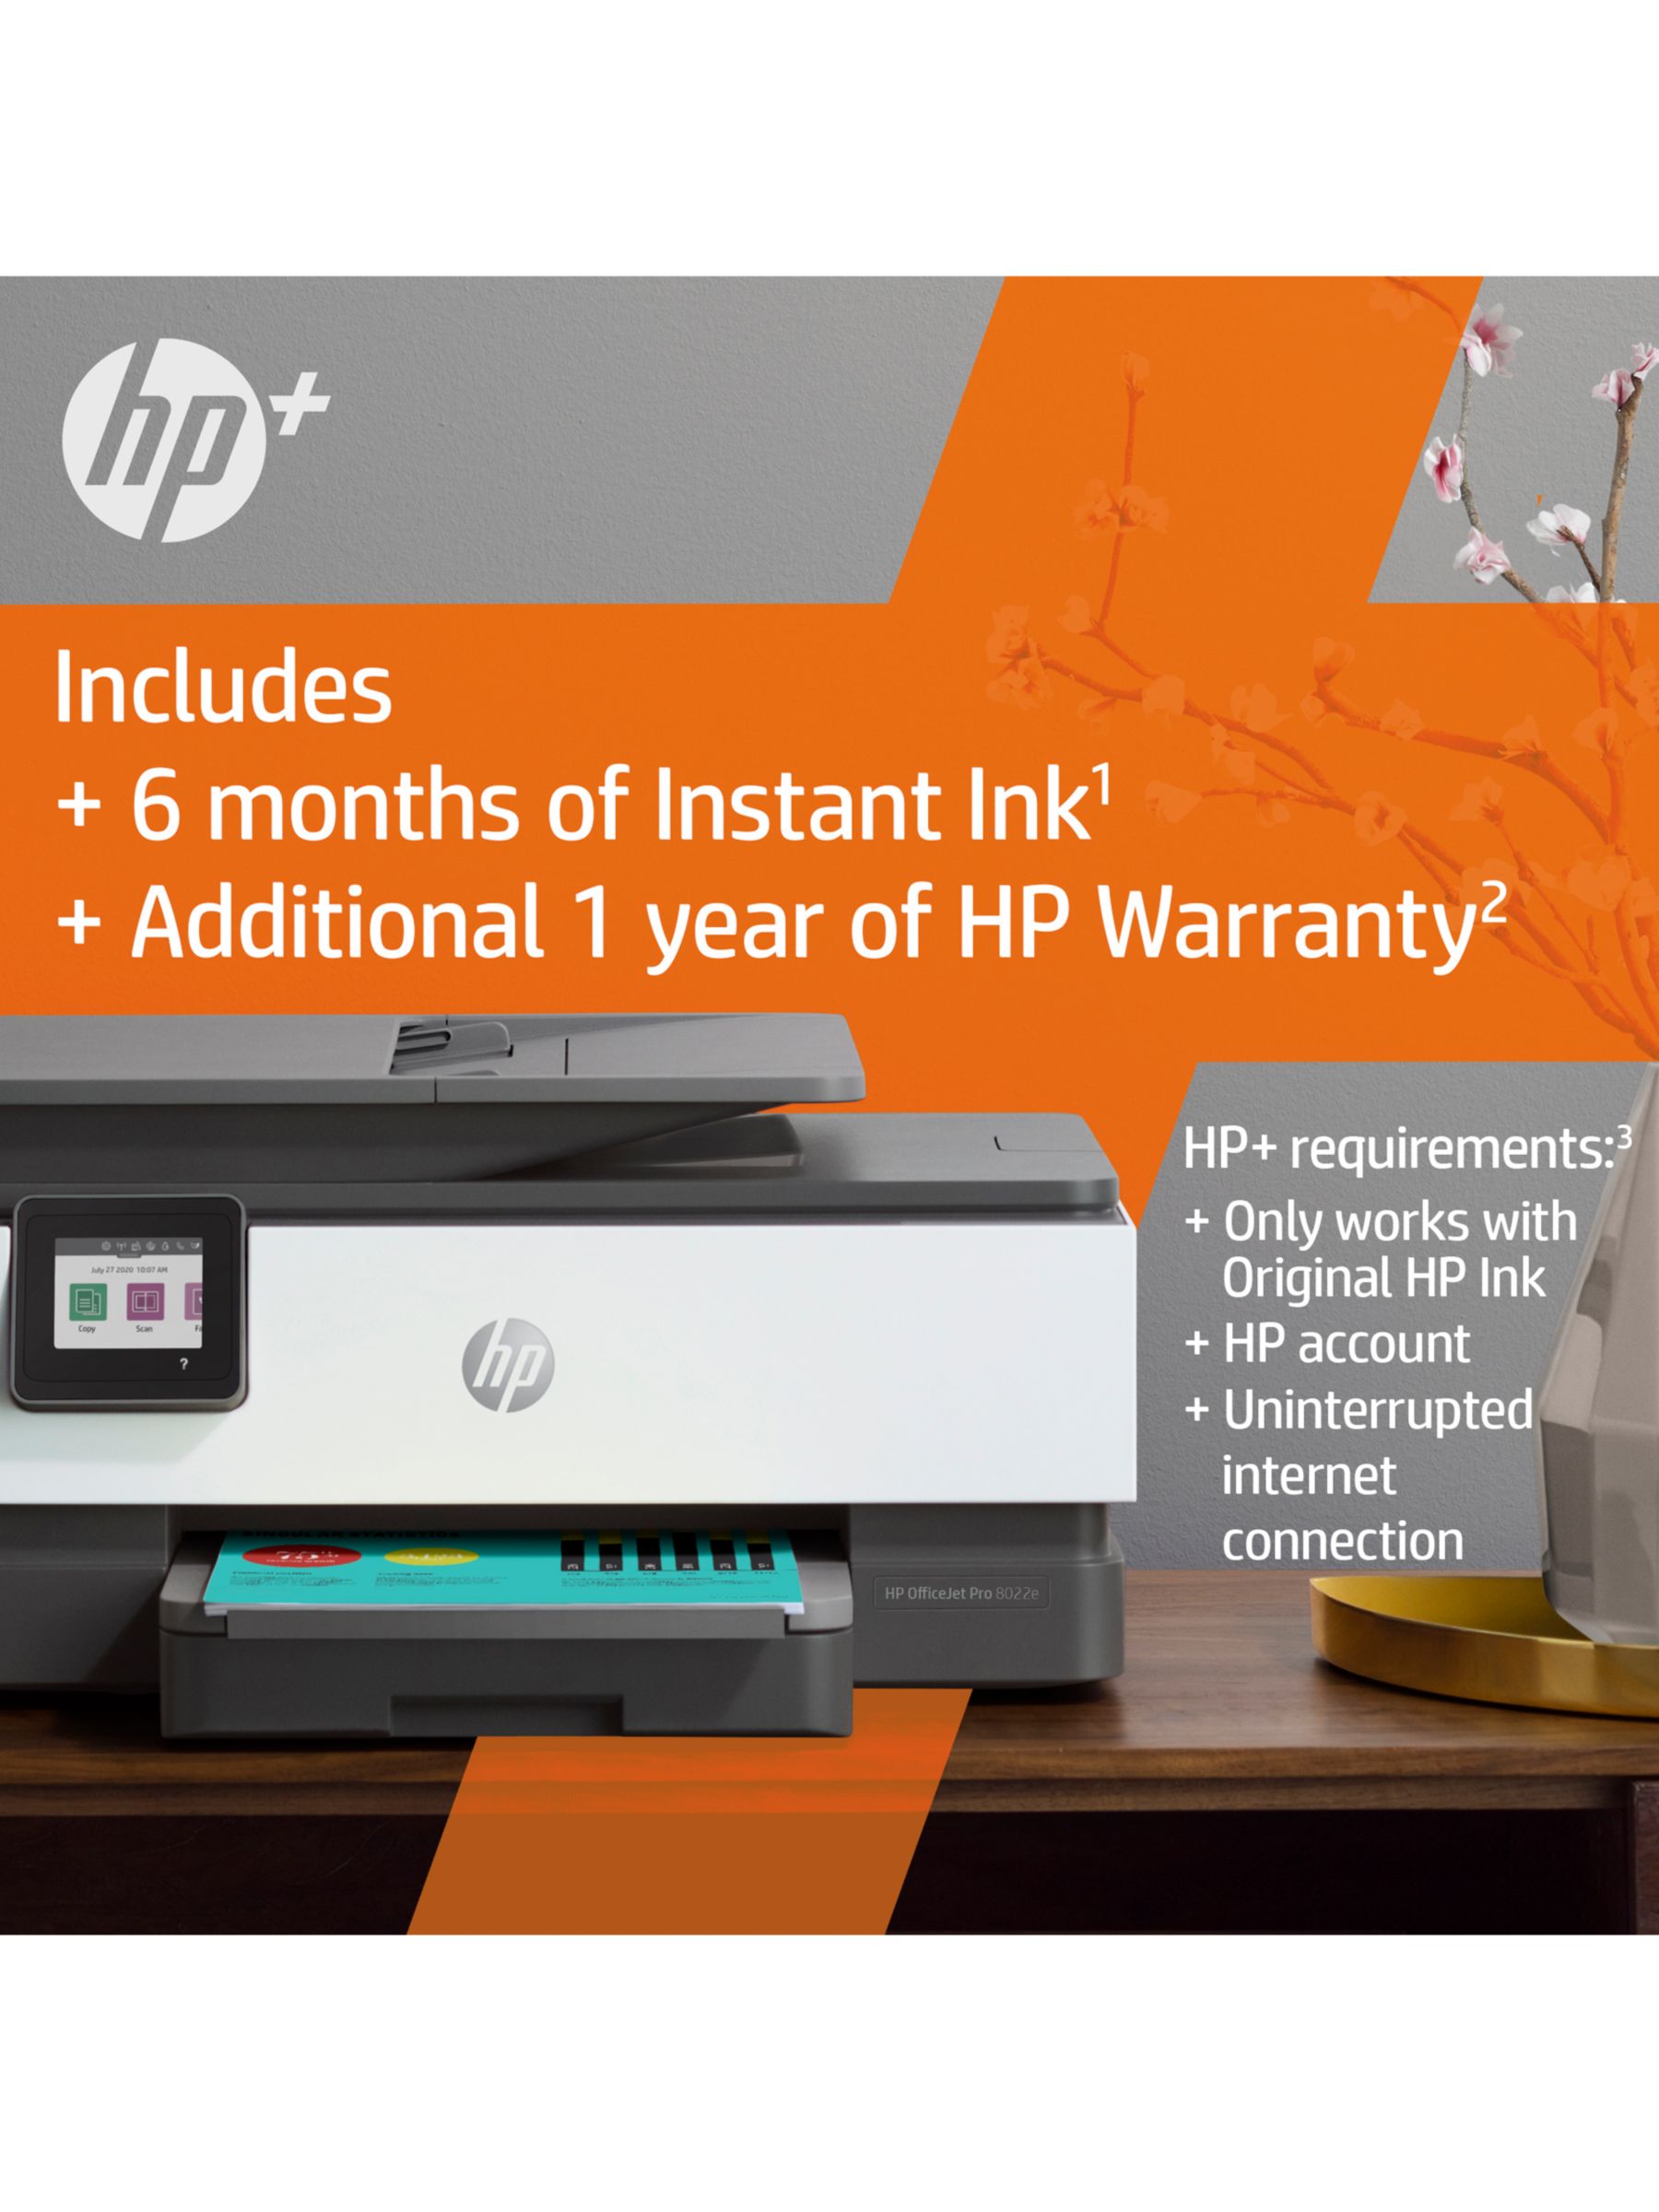 HP OfficeJet Pro 7740 All-in-One Wide Format Printer - Education